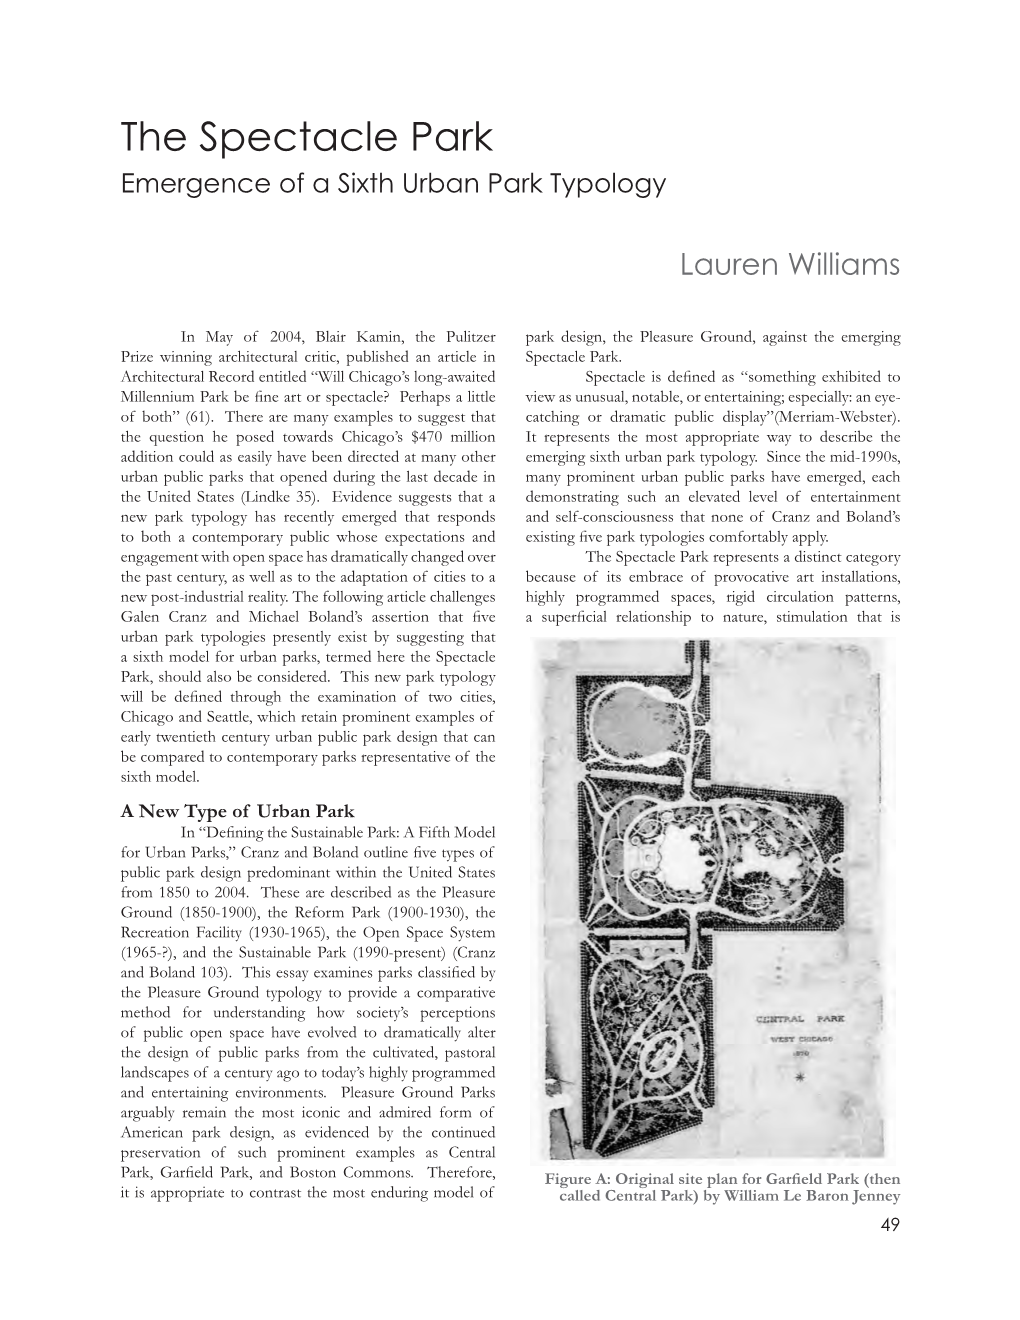 The Spectacle Park Emergence of a Sixth Urban Park Typology